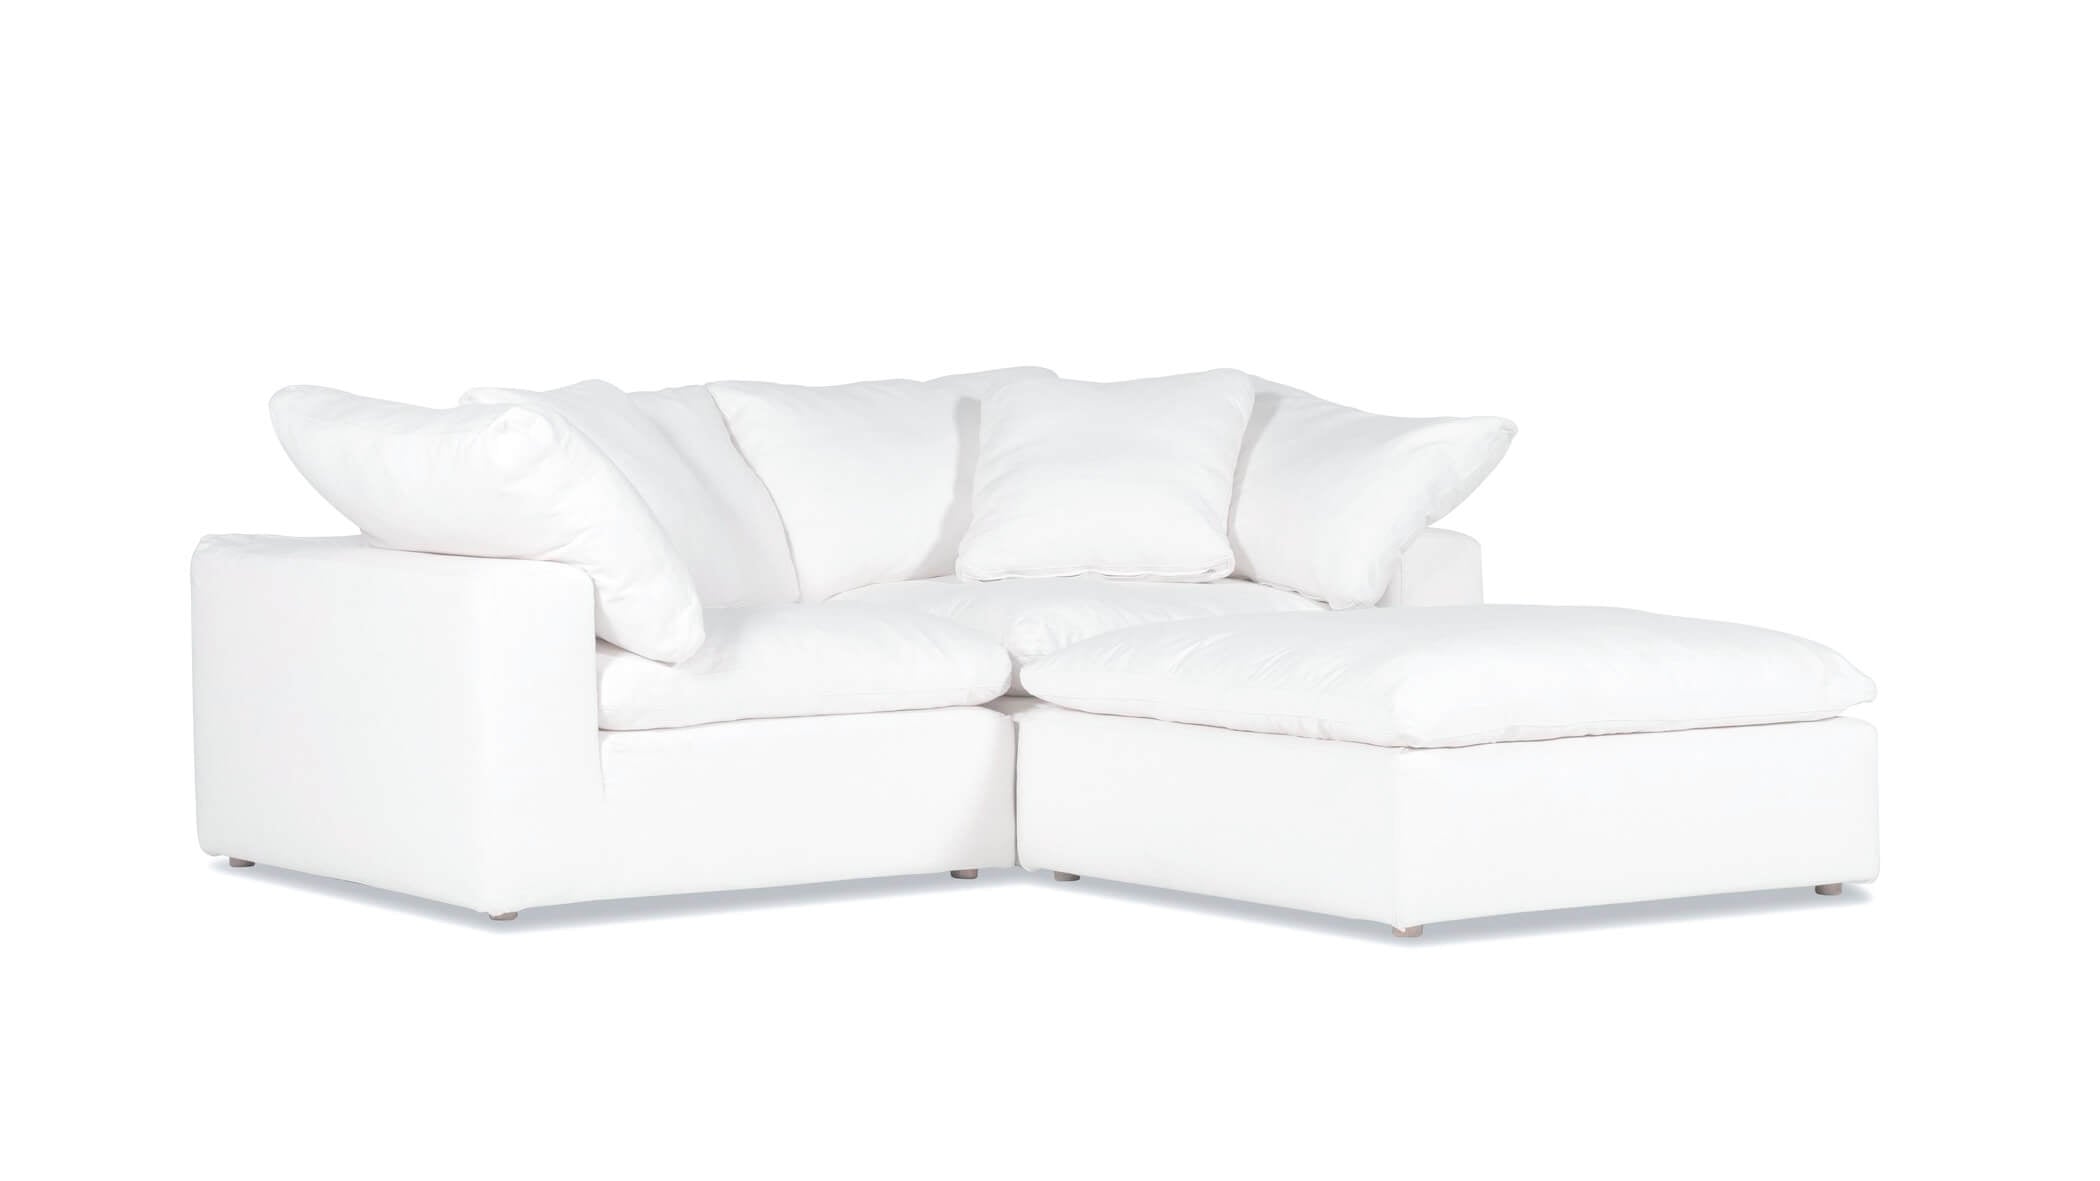 Movie Night™ 3-Piece Modular Sectional, Large, Brie - Image 3